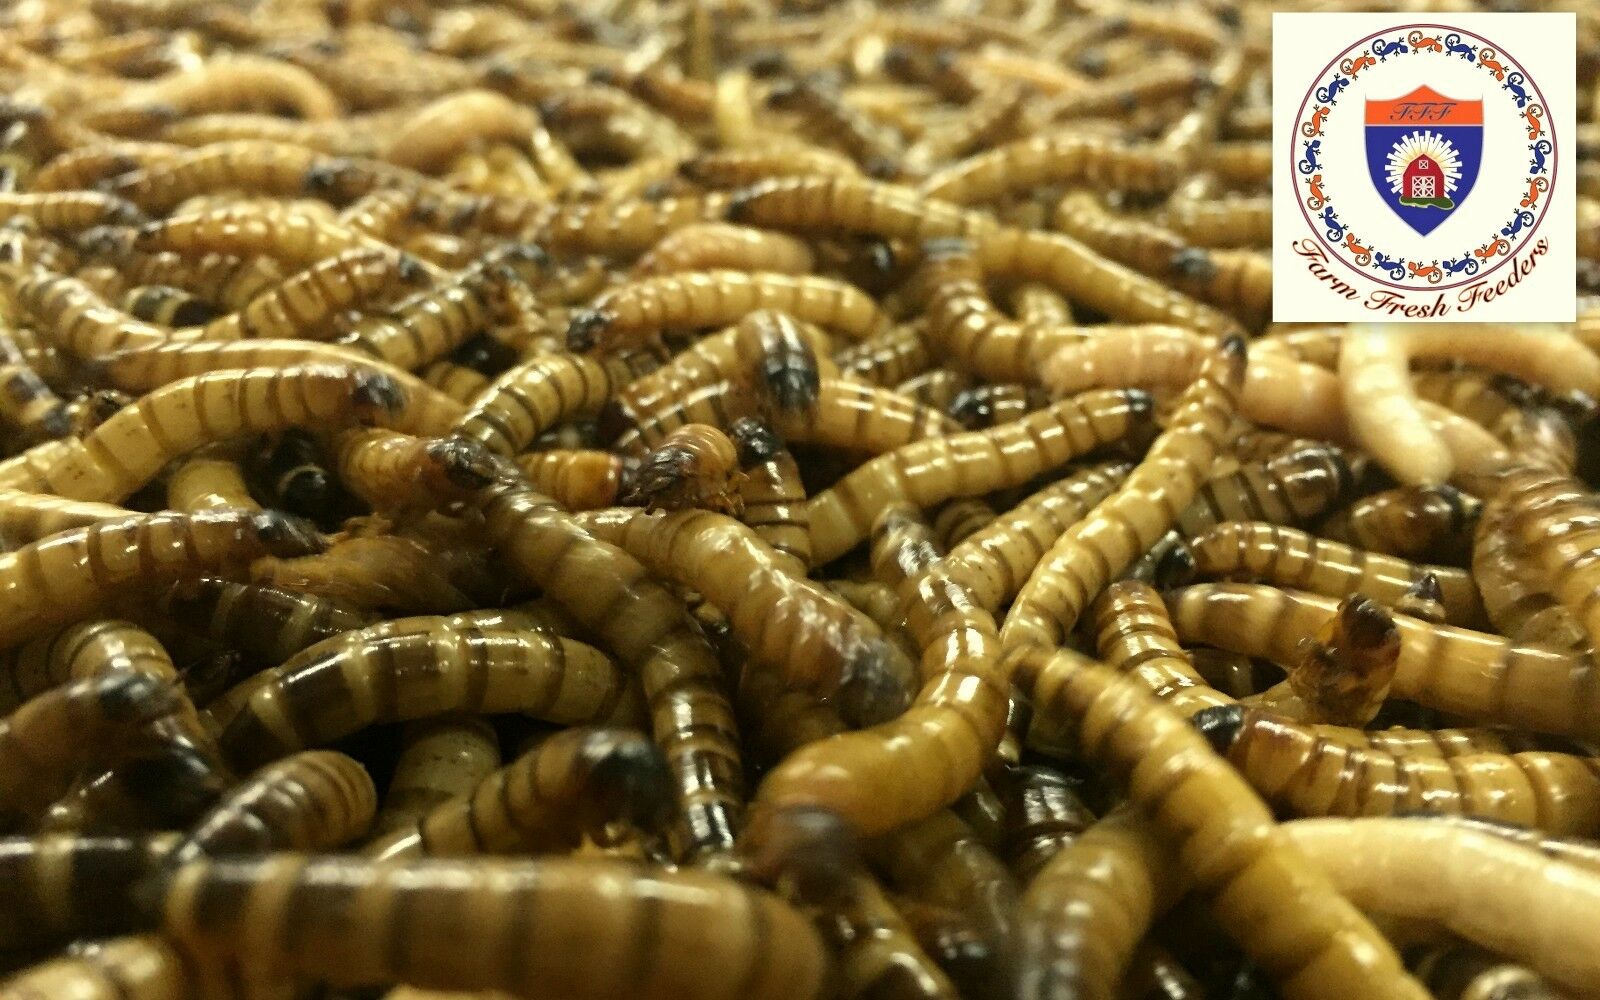 Live Superworms - Organically Raised - ALL SIZES / ALL COUNTS!  Free Shipping!